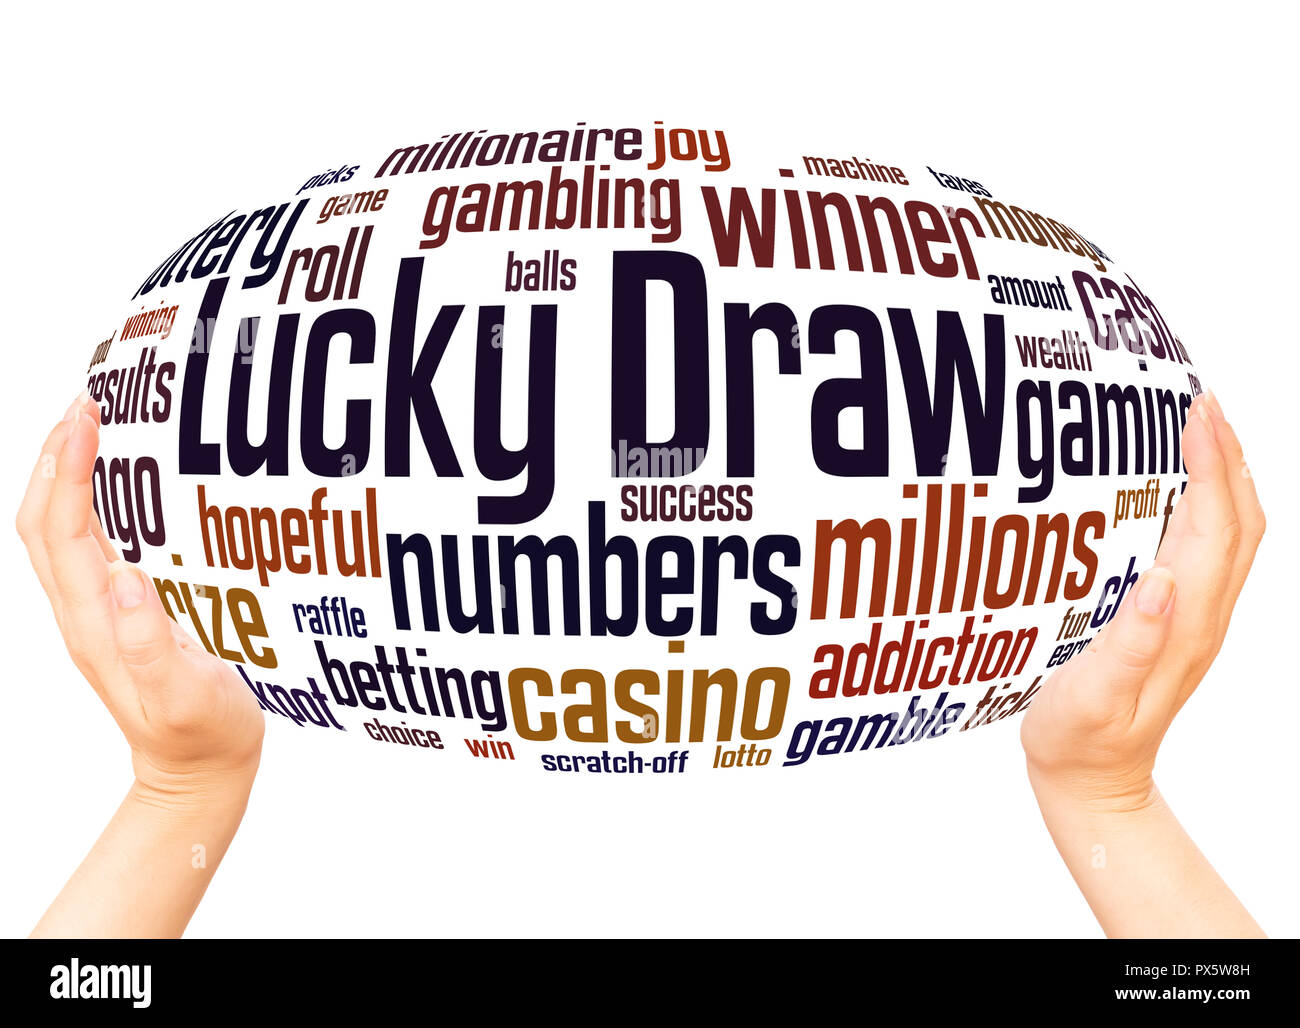 Lucky Draw word cloud hand sphere concept on white background Stock Photo -  Alamy